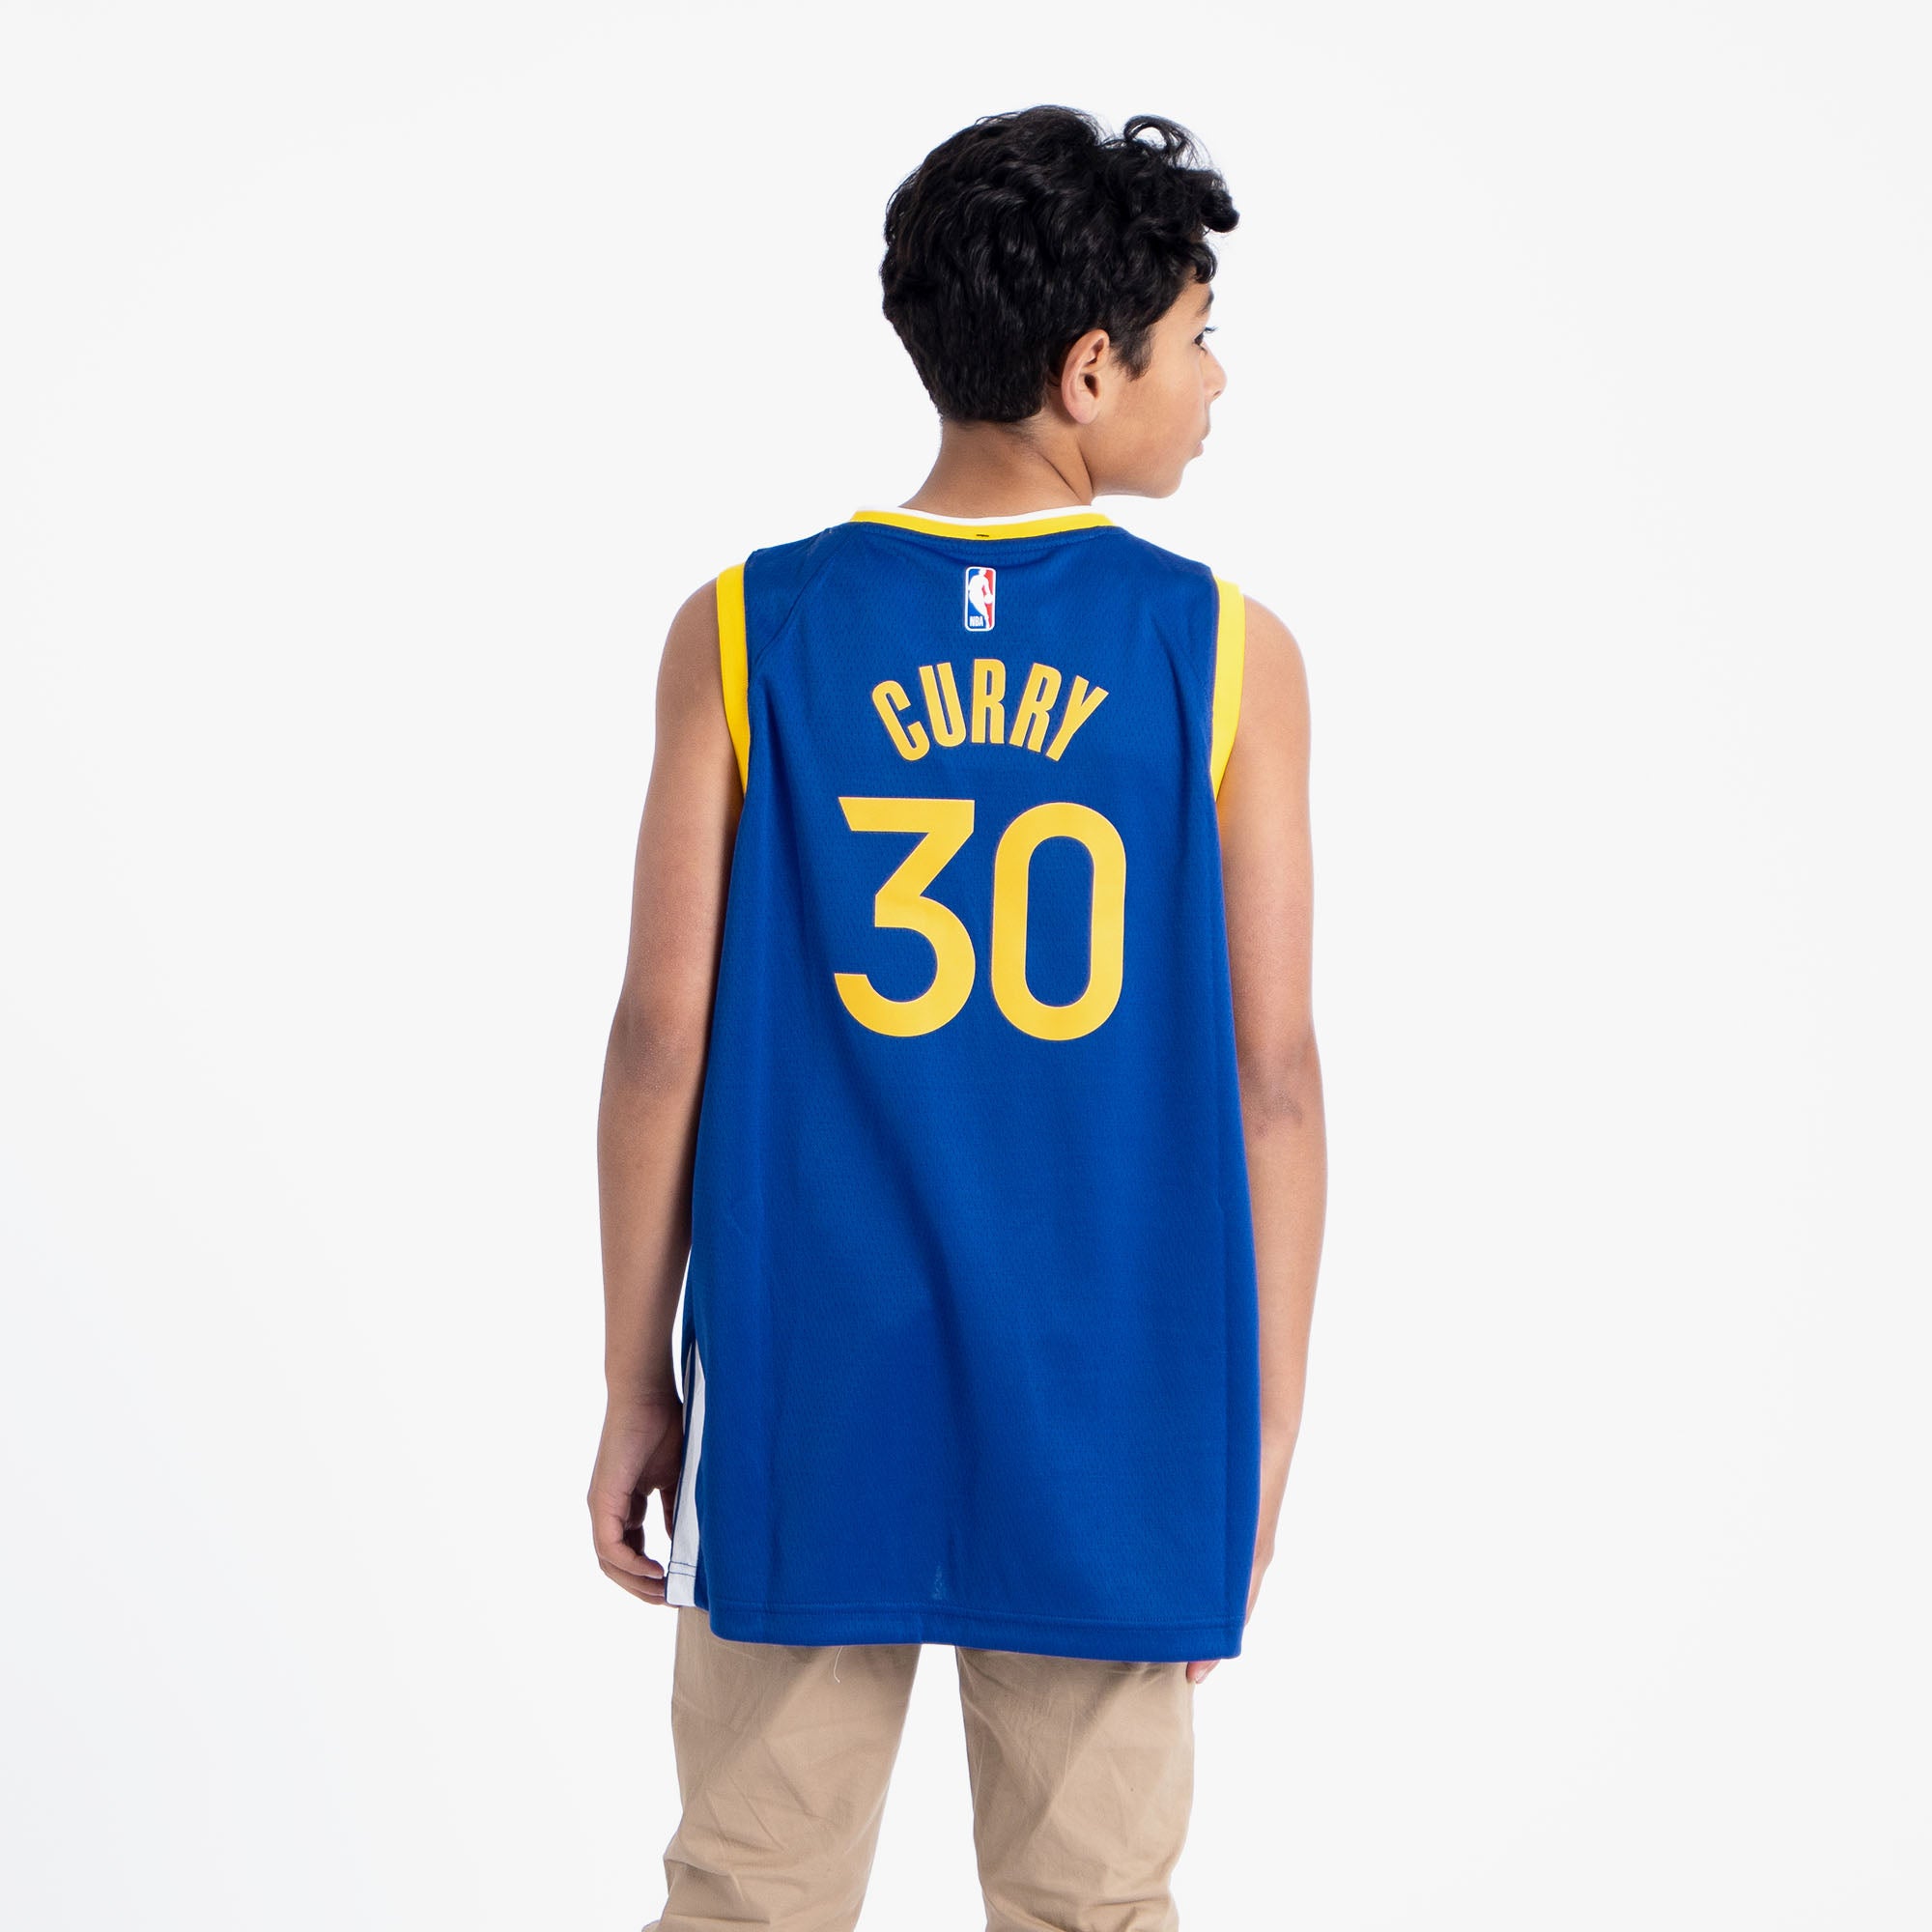 STEPH CURRY Nike NBA Authentics JERSEY Kids Youth Golden State WARRIORS Sz  L